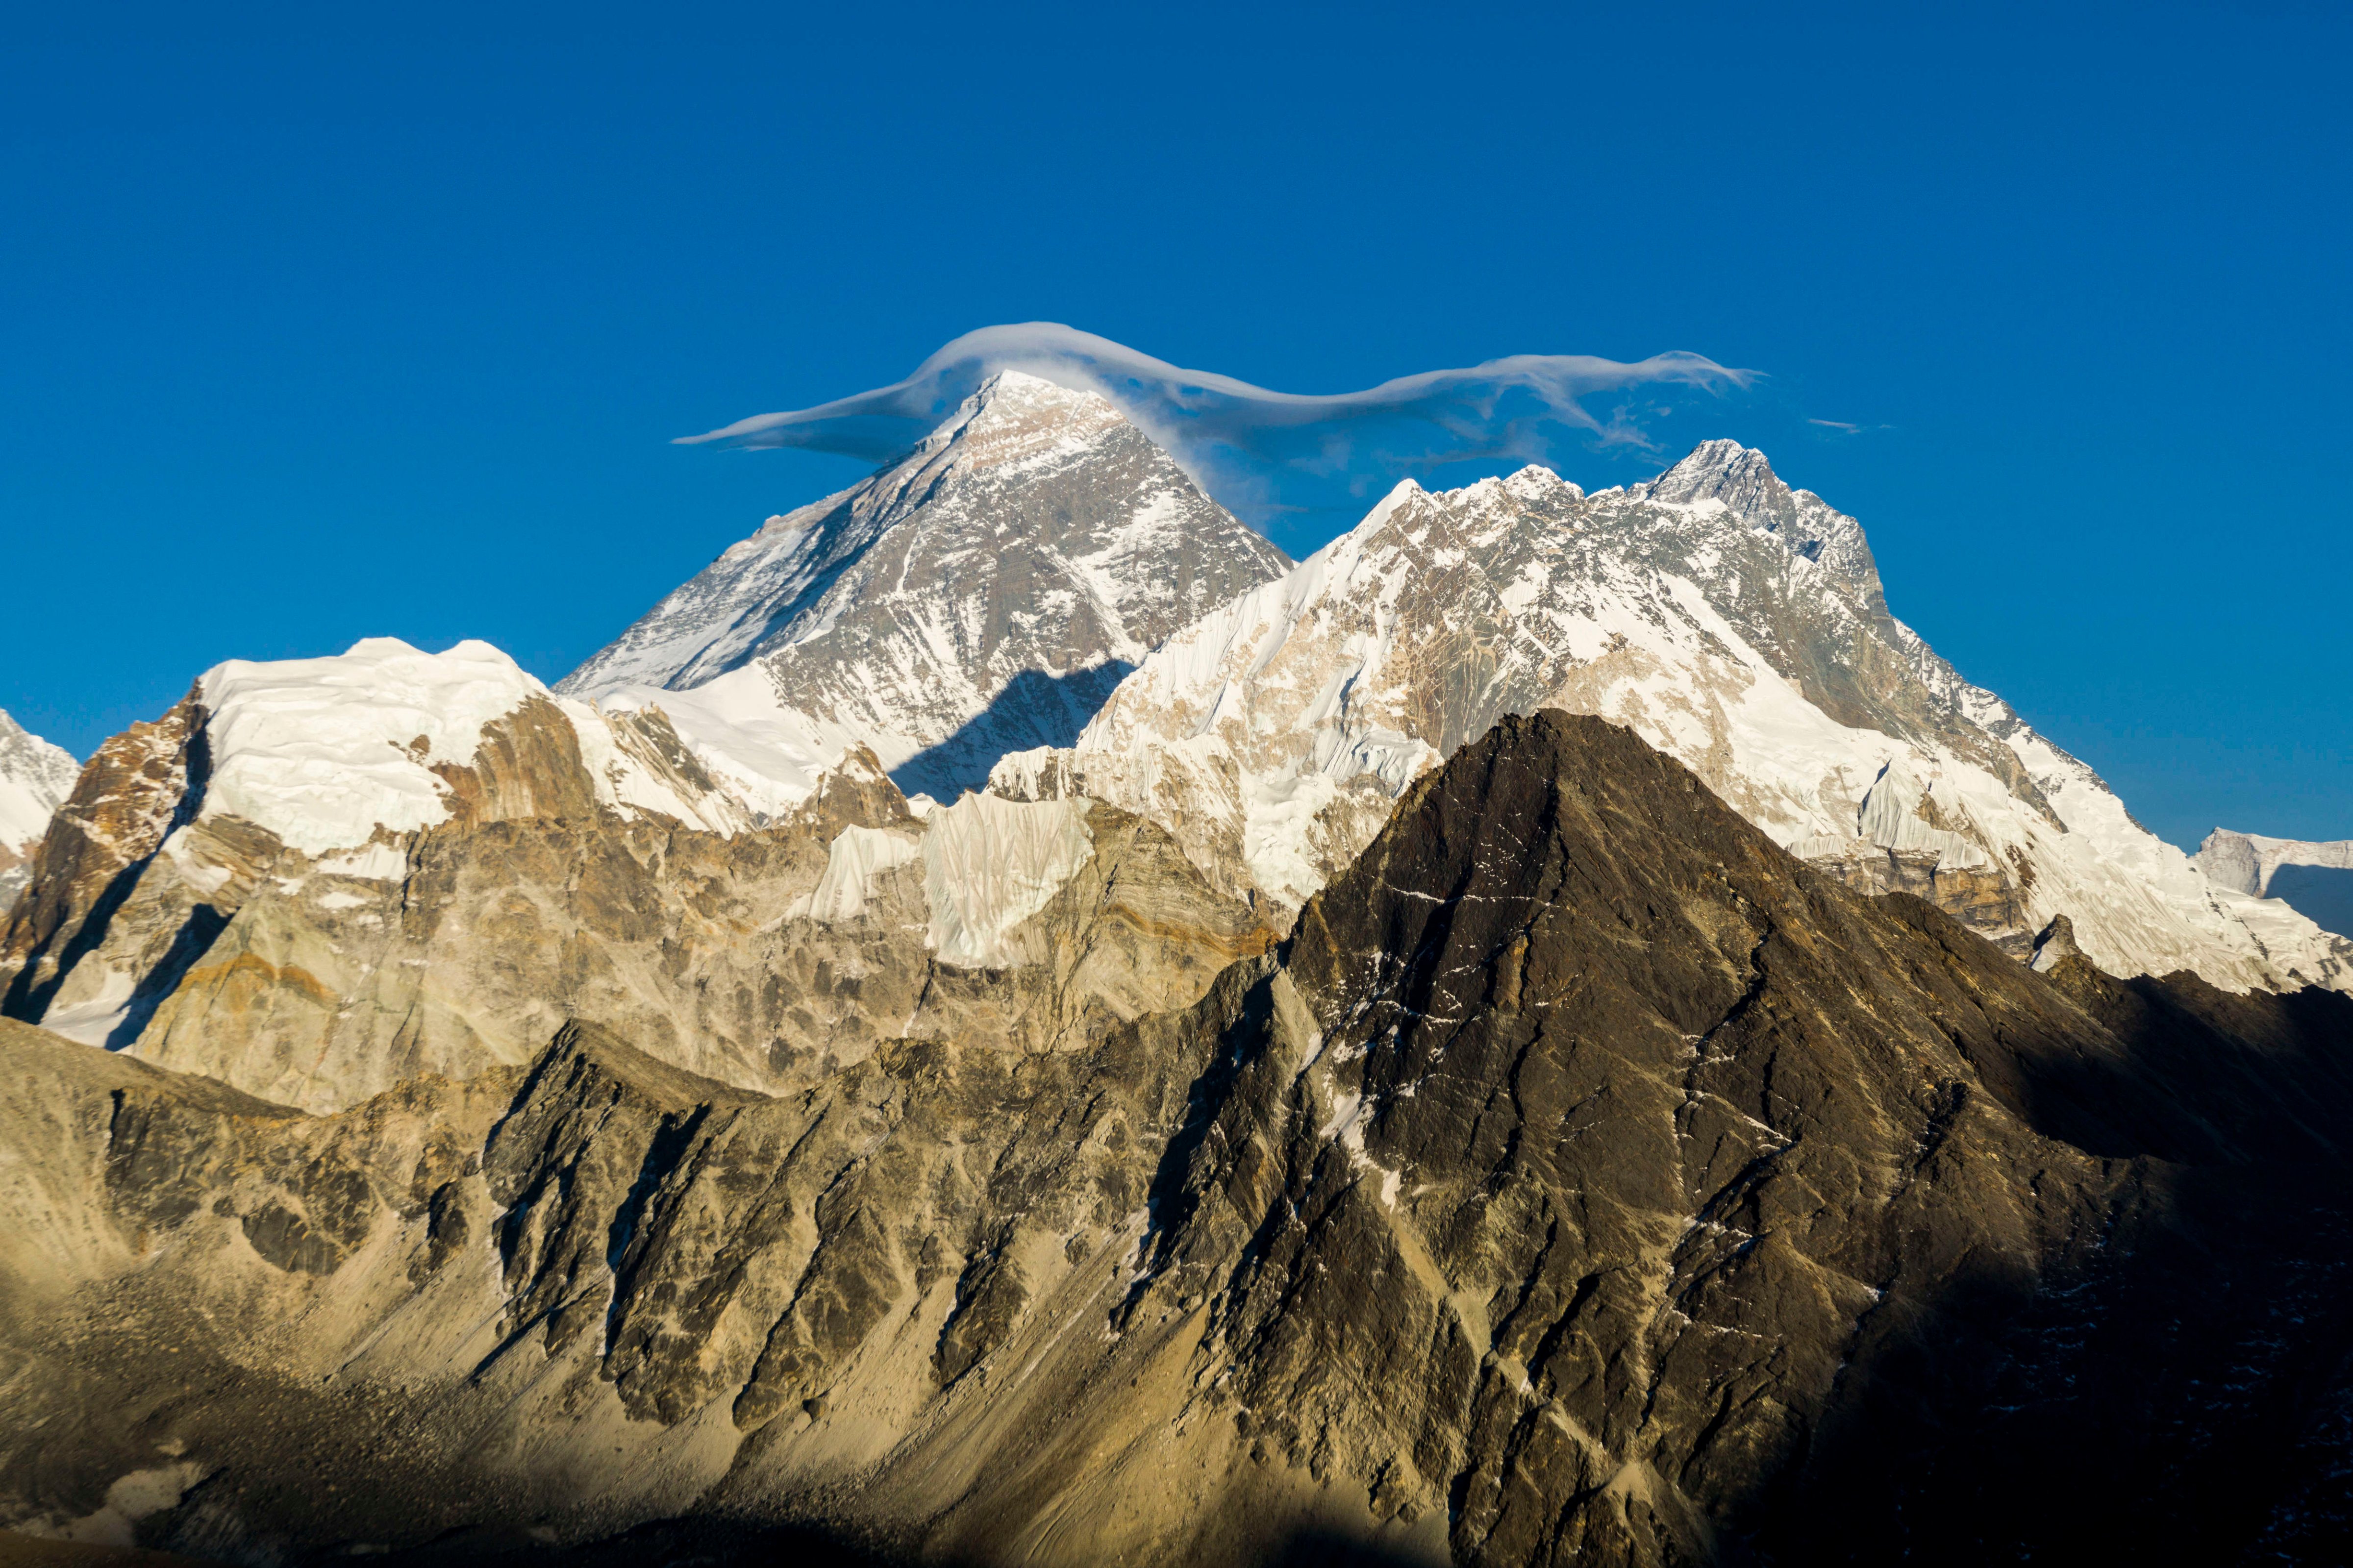 Mt. Everest  with a white cloud on top, seen from Gokyo Ri at sunset. (Frank Bienewald—LightRocket/Getty Images)